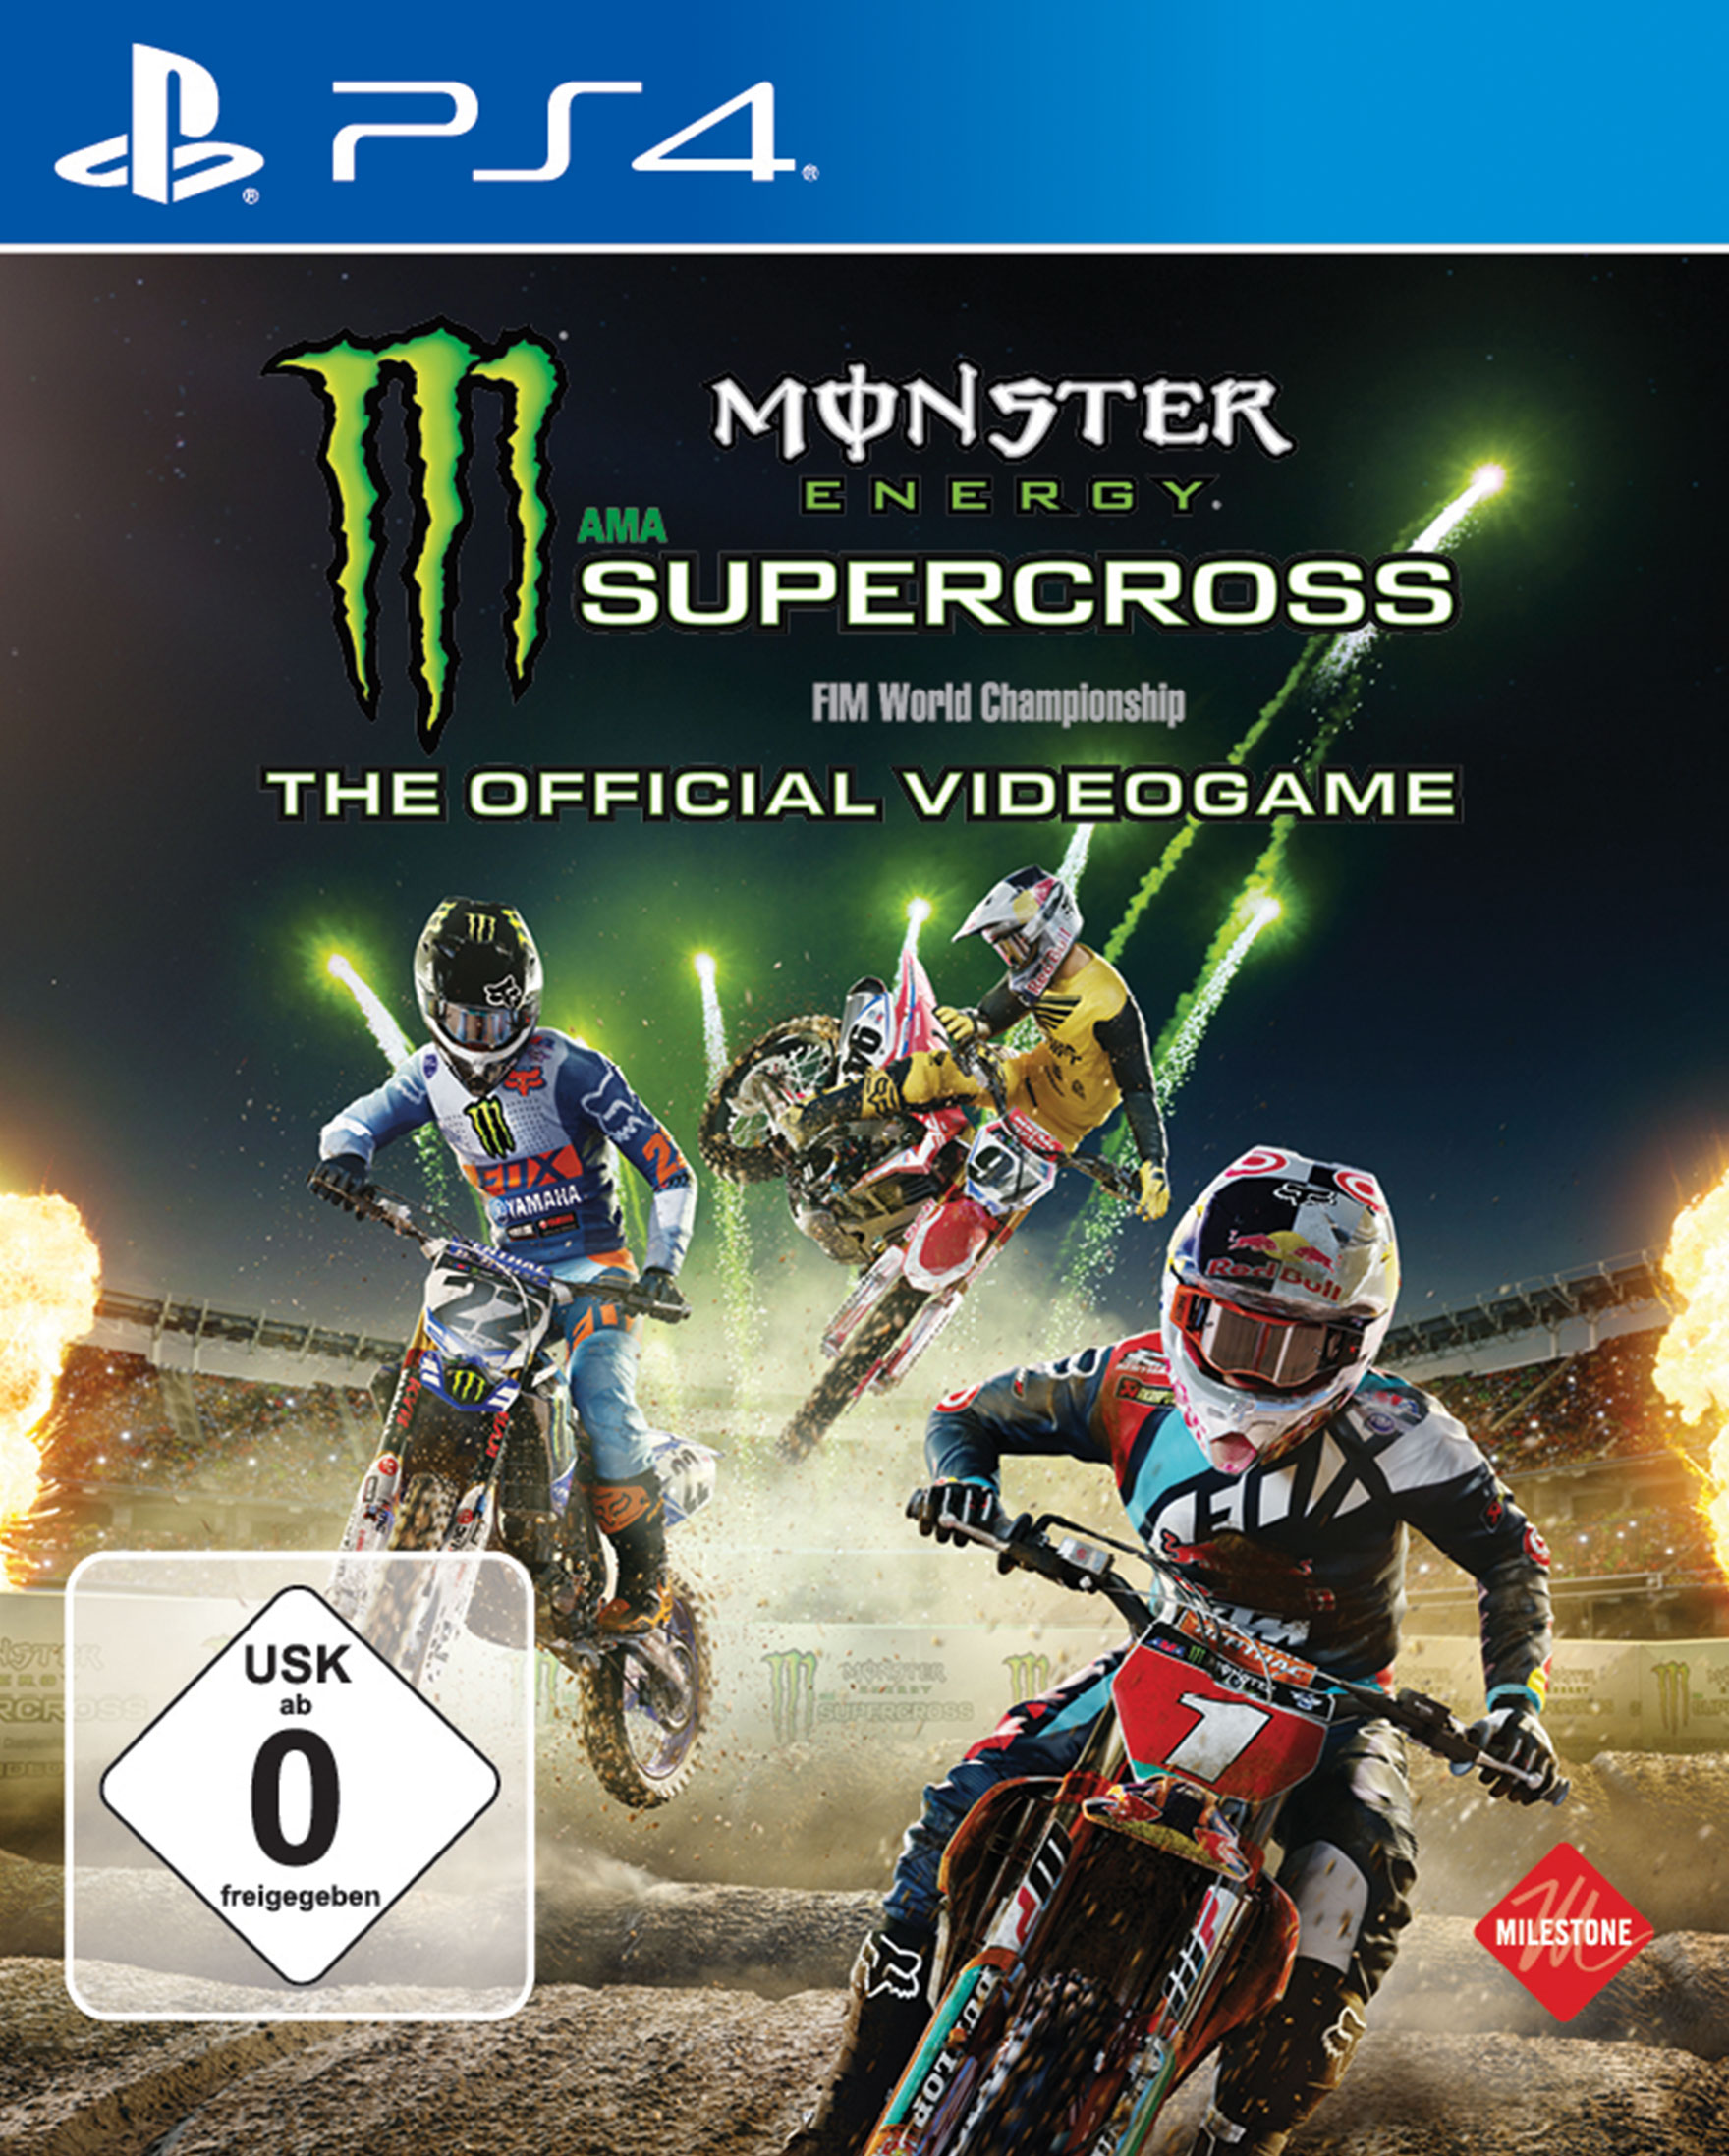 Supercross - The Energy Monster - Official [PlayStation 4] Videogame